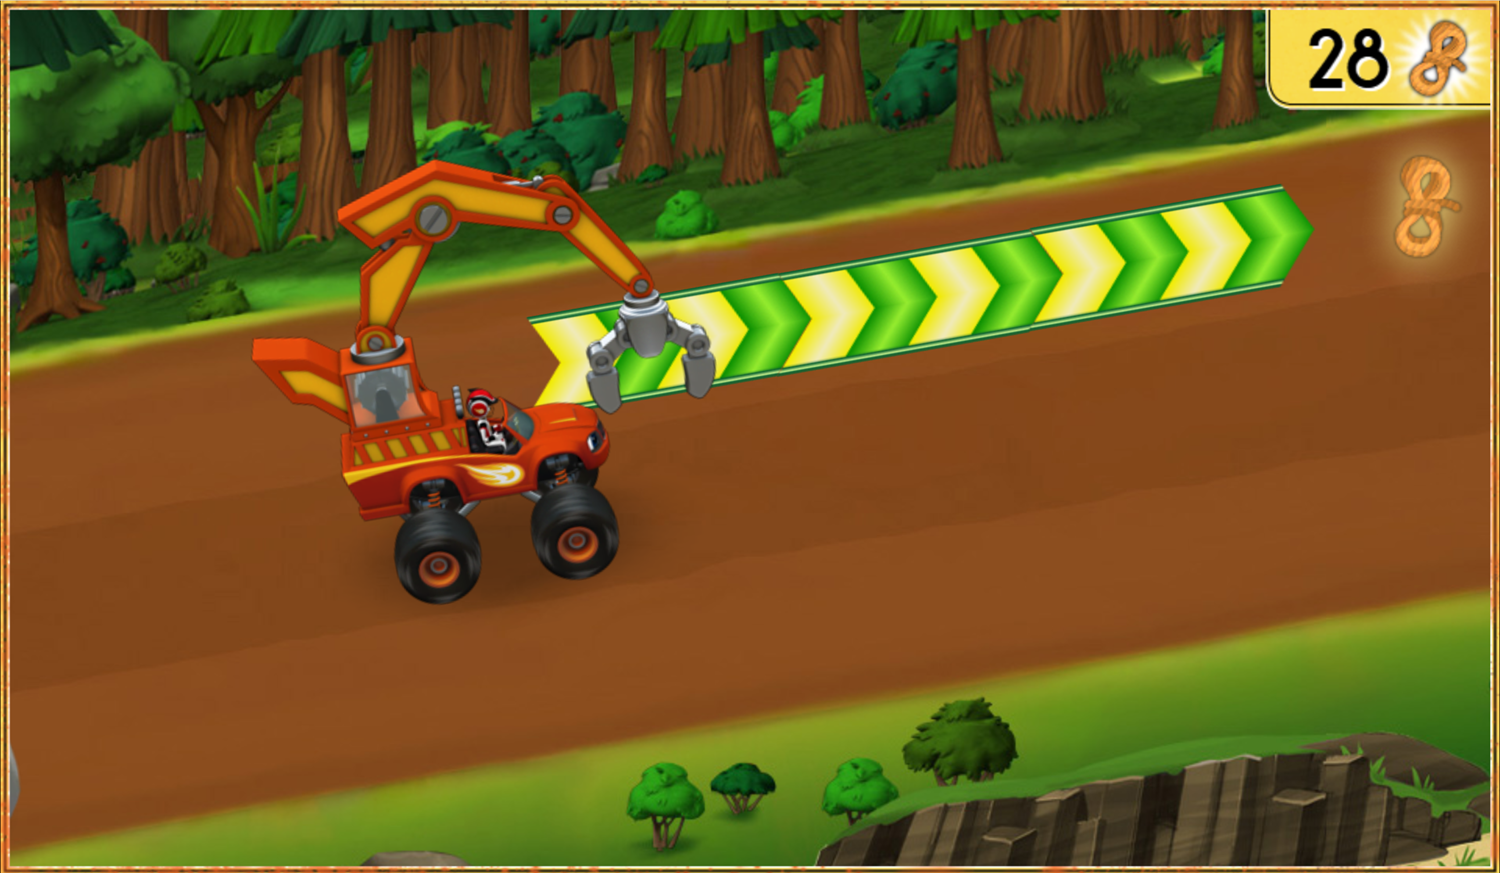 Blaze and the Monster Machines Mud Mountain Rescue Wood Chipping Truck Screenshot.